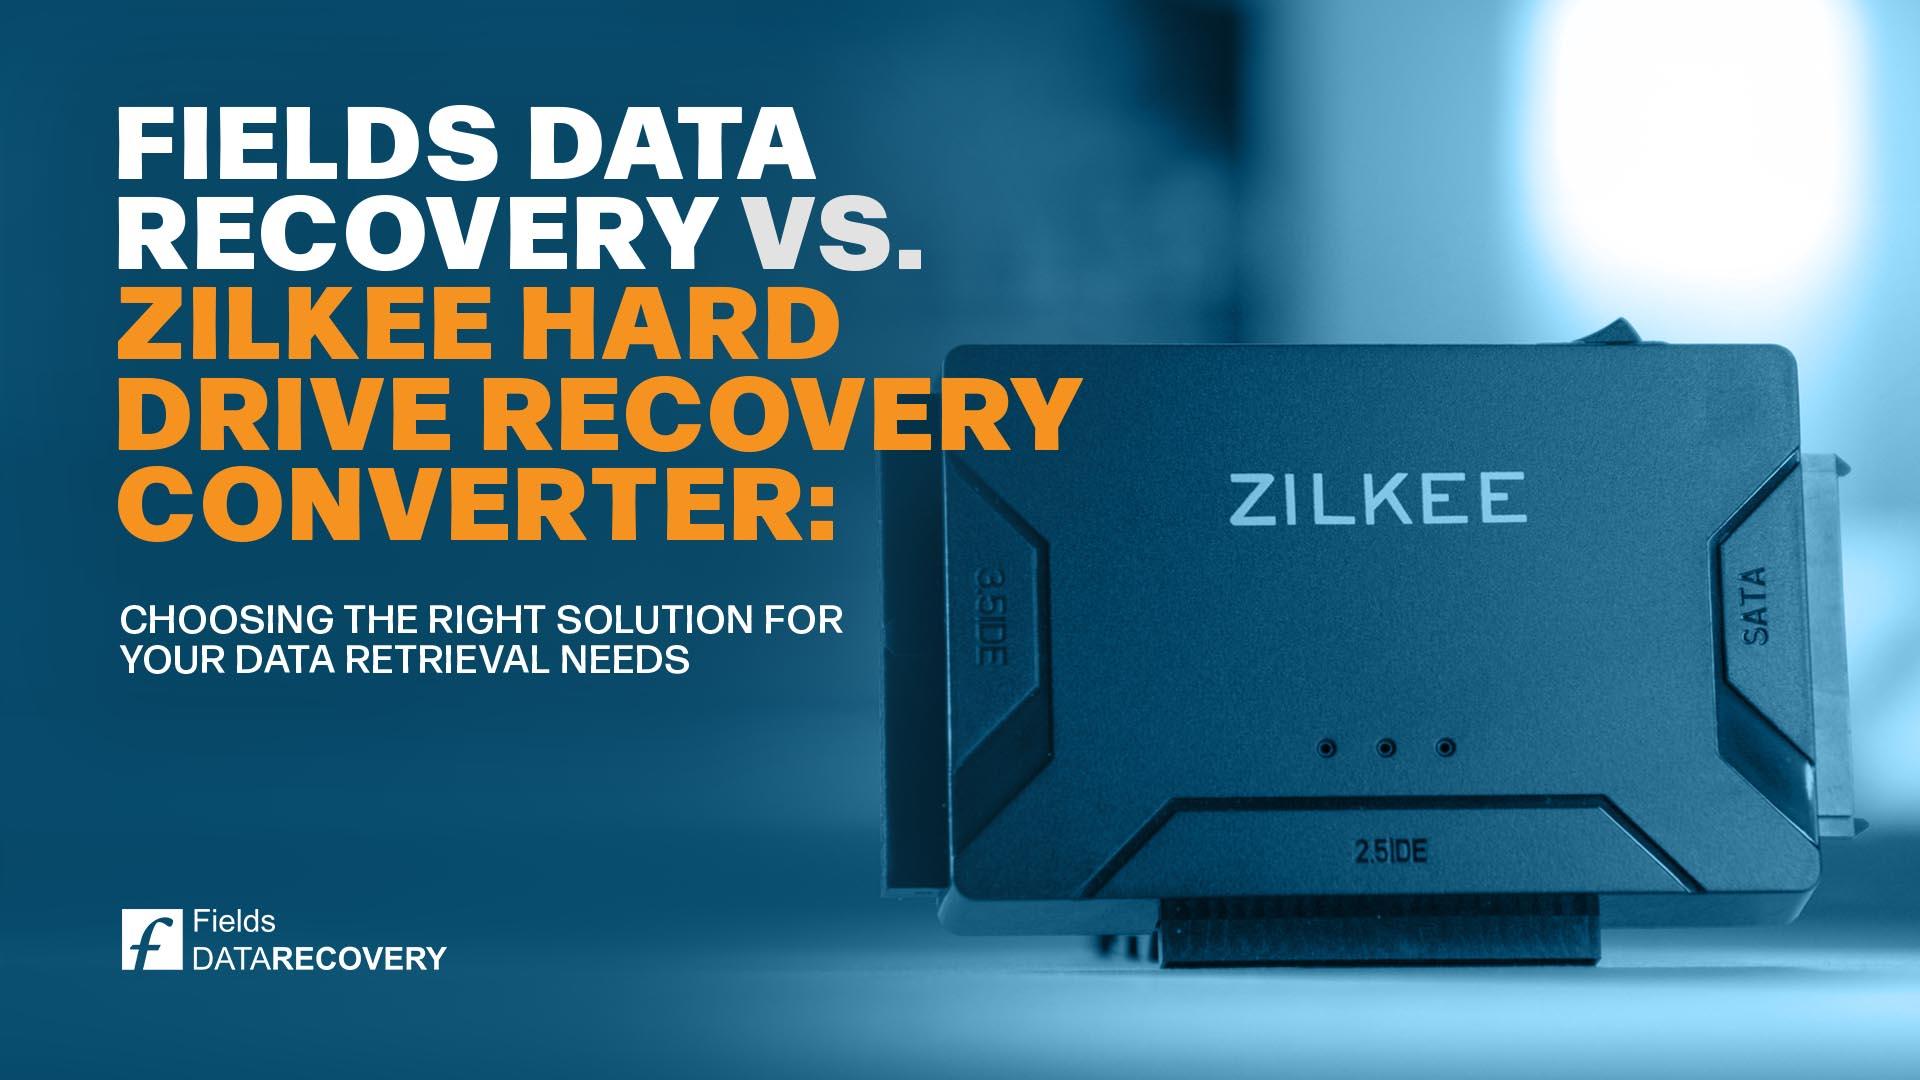 Fields Data Recovery vs. Zilkee Hard Drive Recovery Converter: Choosing the Right Solution for Your Data Retrieval Needs